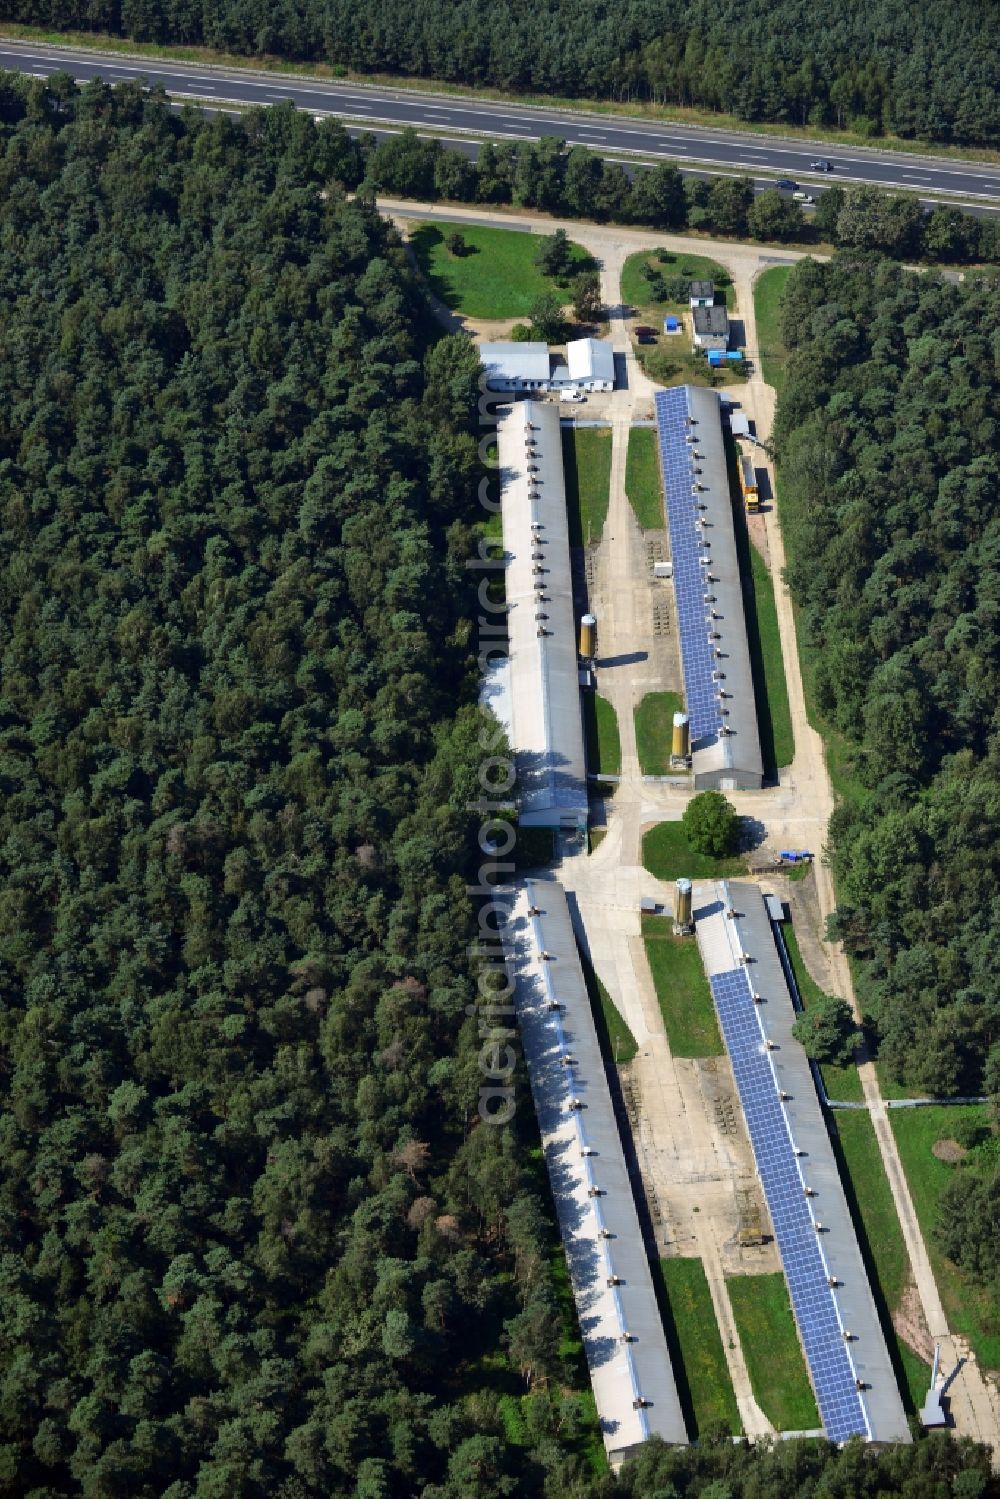 Aerial image Radeburg - Building complexes of the chicken farm in the woods at the Zschornaer road in Radeburg in Saxony